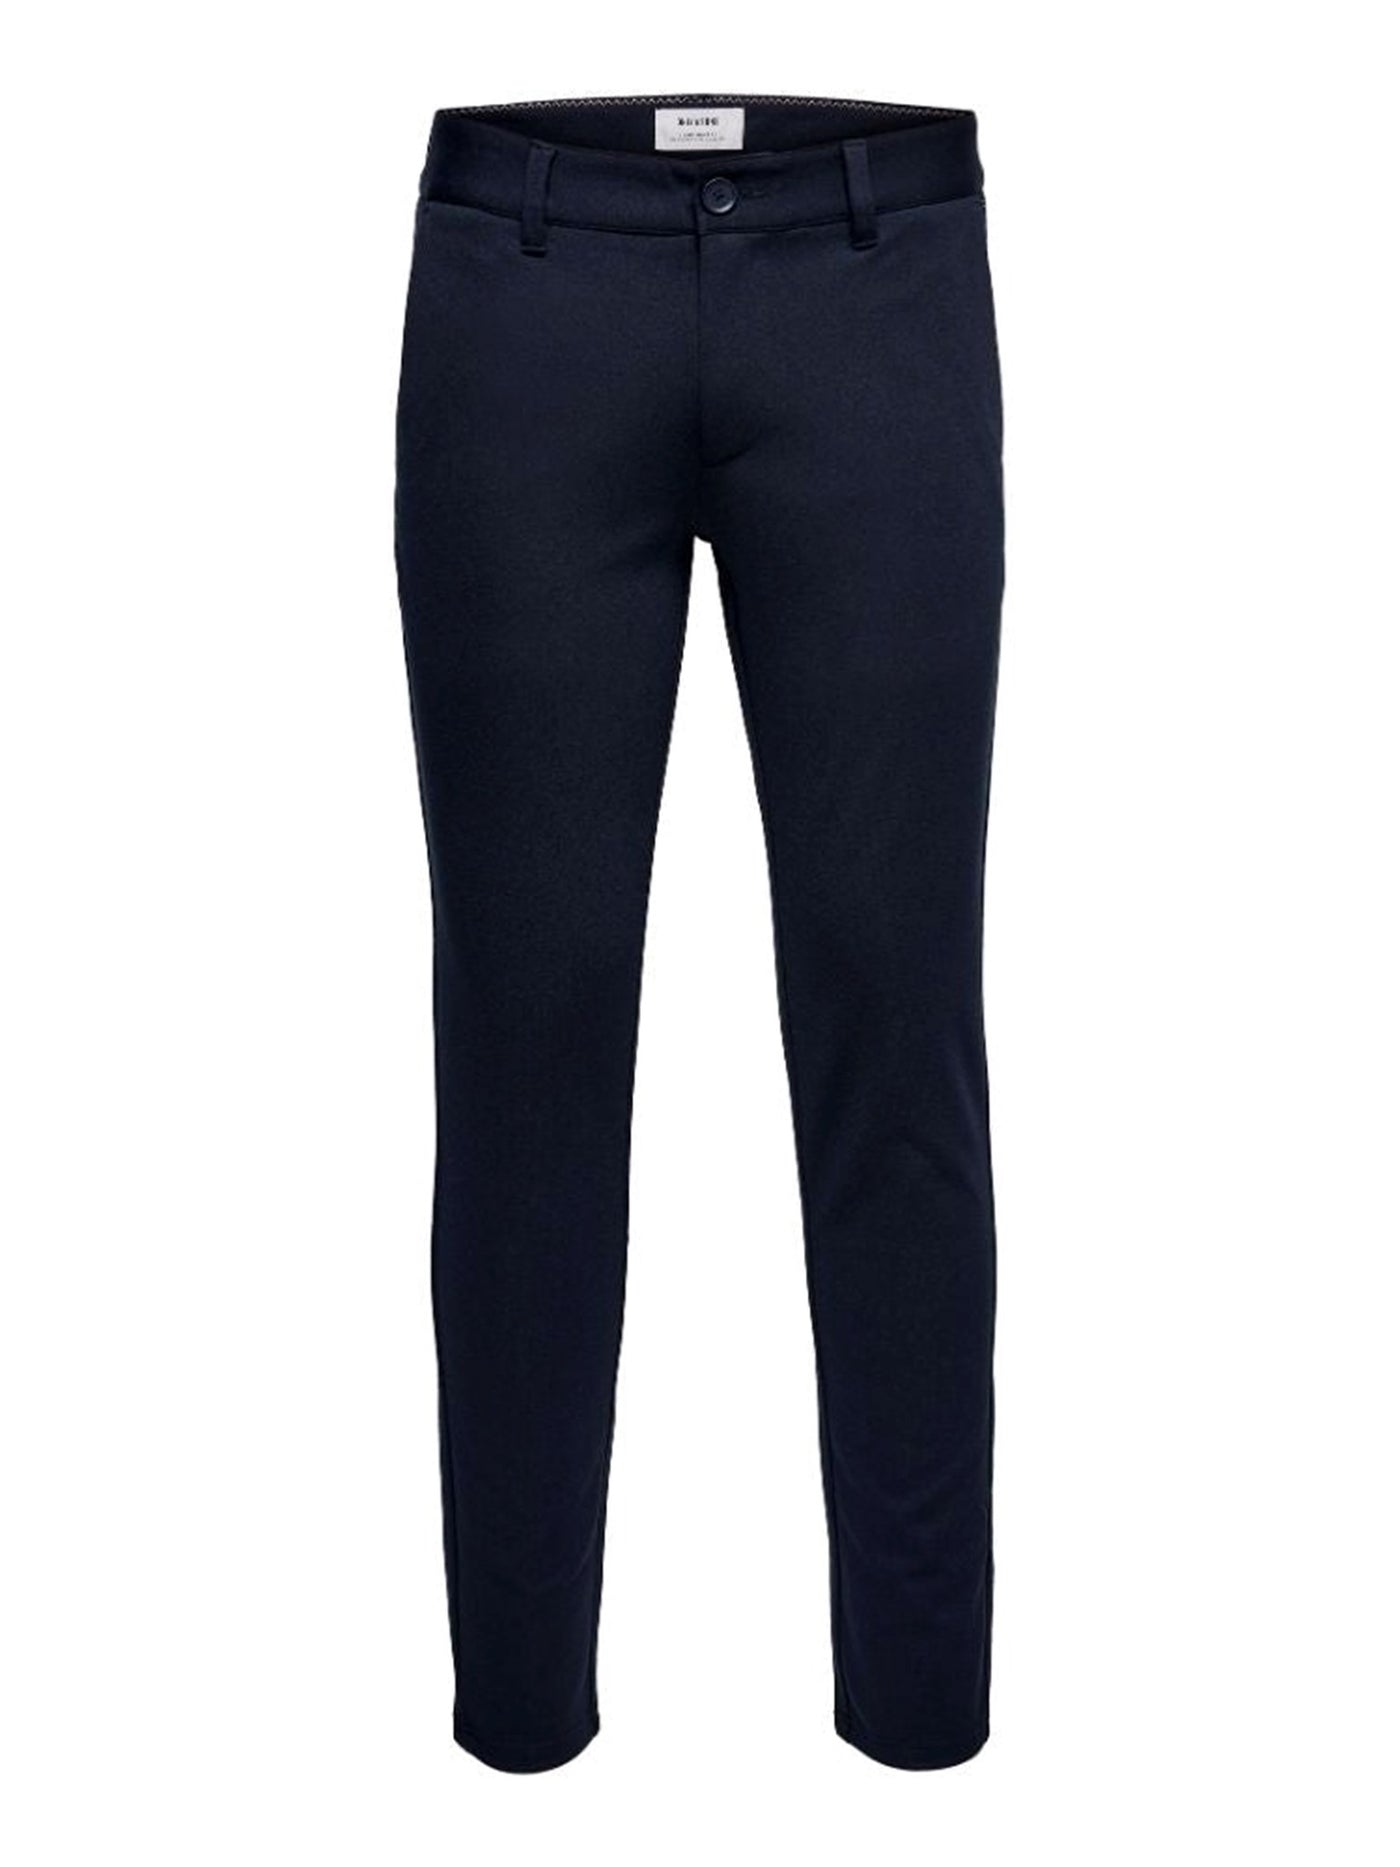 Mark Pants - Navy (stretch) - Only & Sons 4